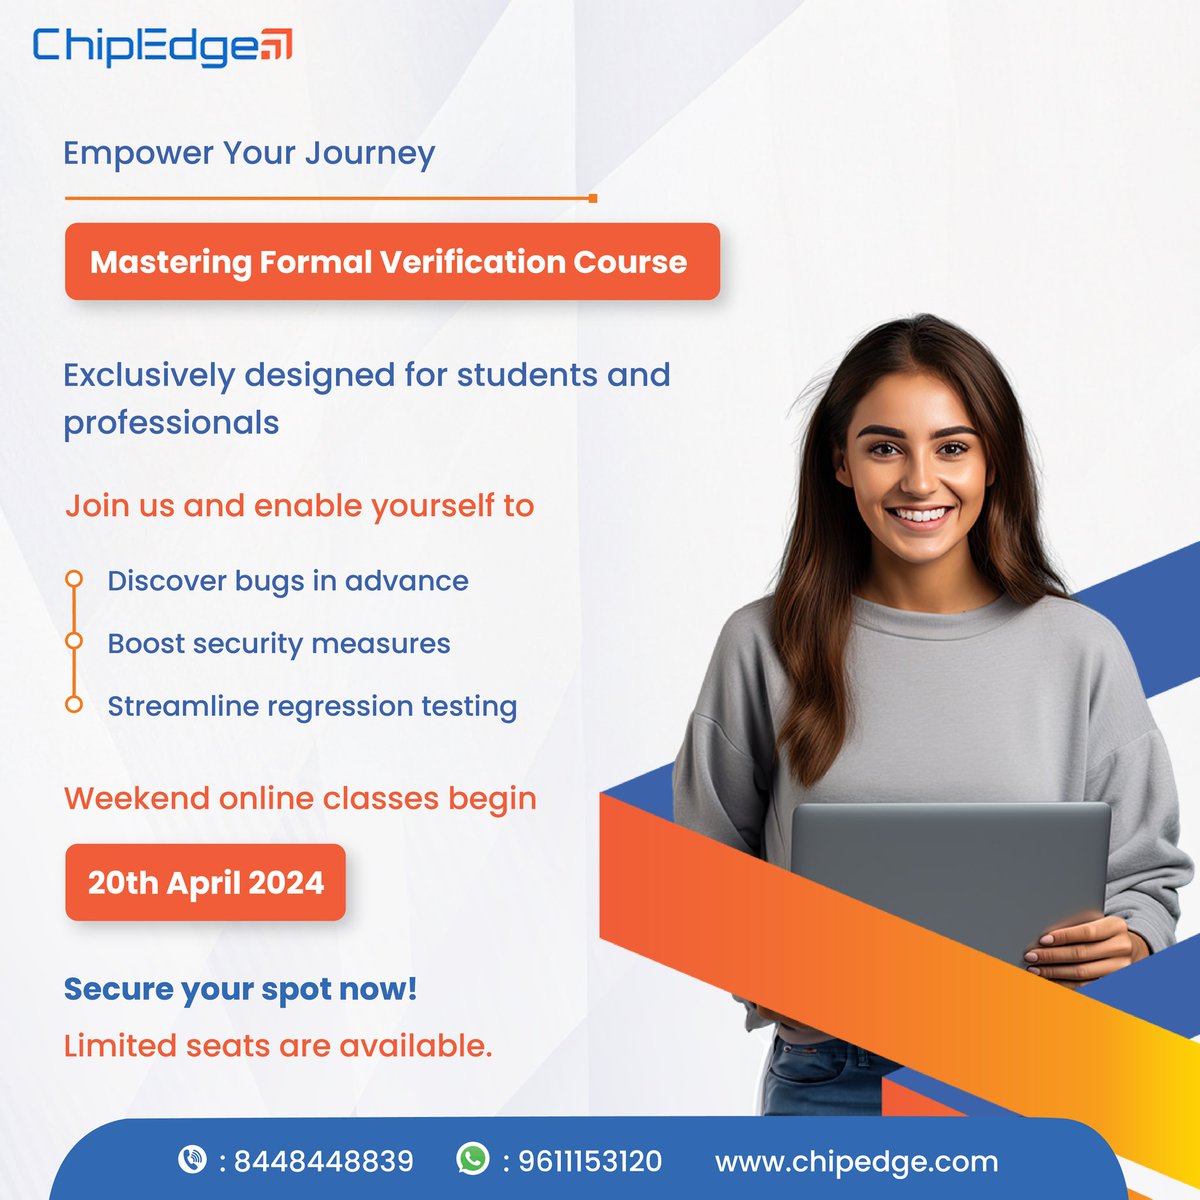 Excel in formal verification with ChipEdge! Join our weekend classes starting April 20th, 2024. 

Enroll now at chipedge.com! 

#VLSISuccess #TechSkills